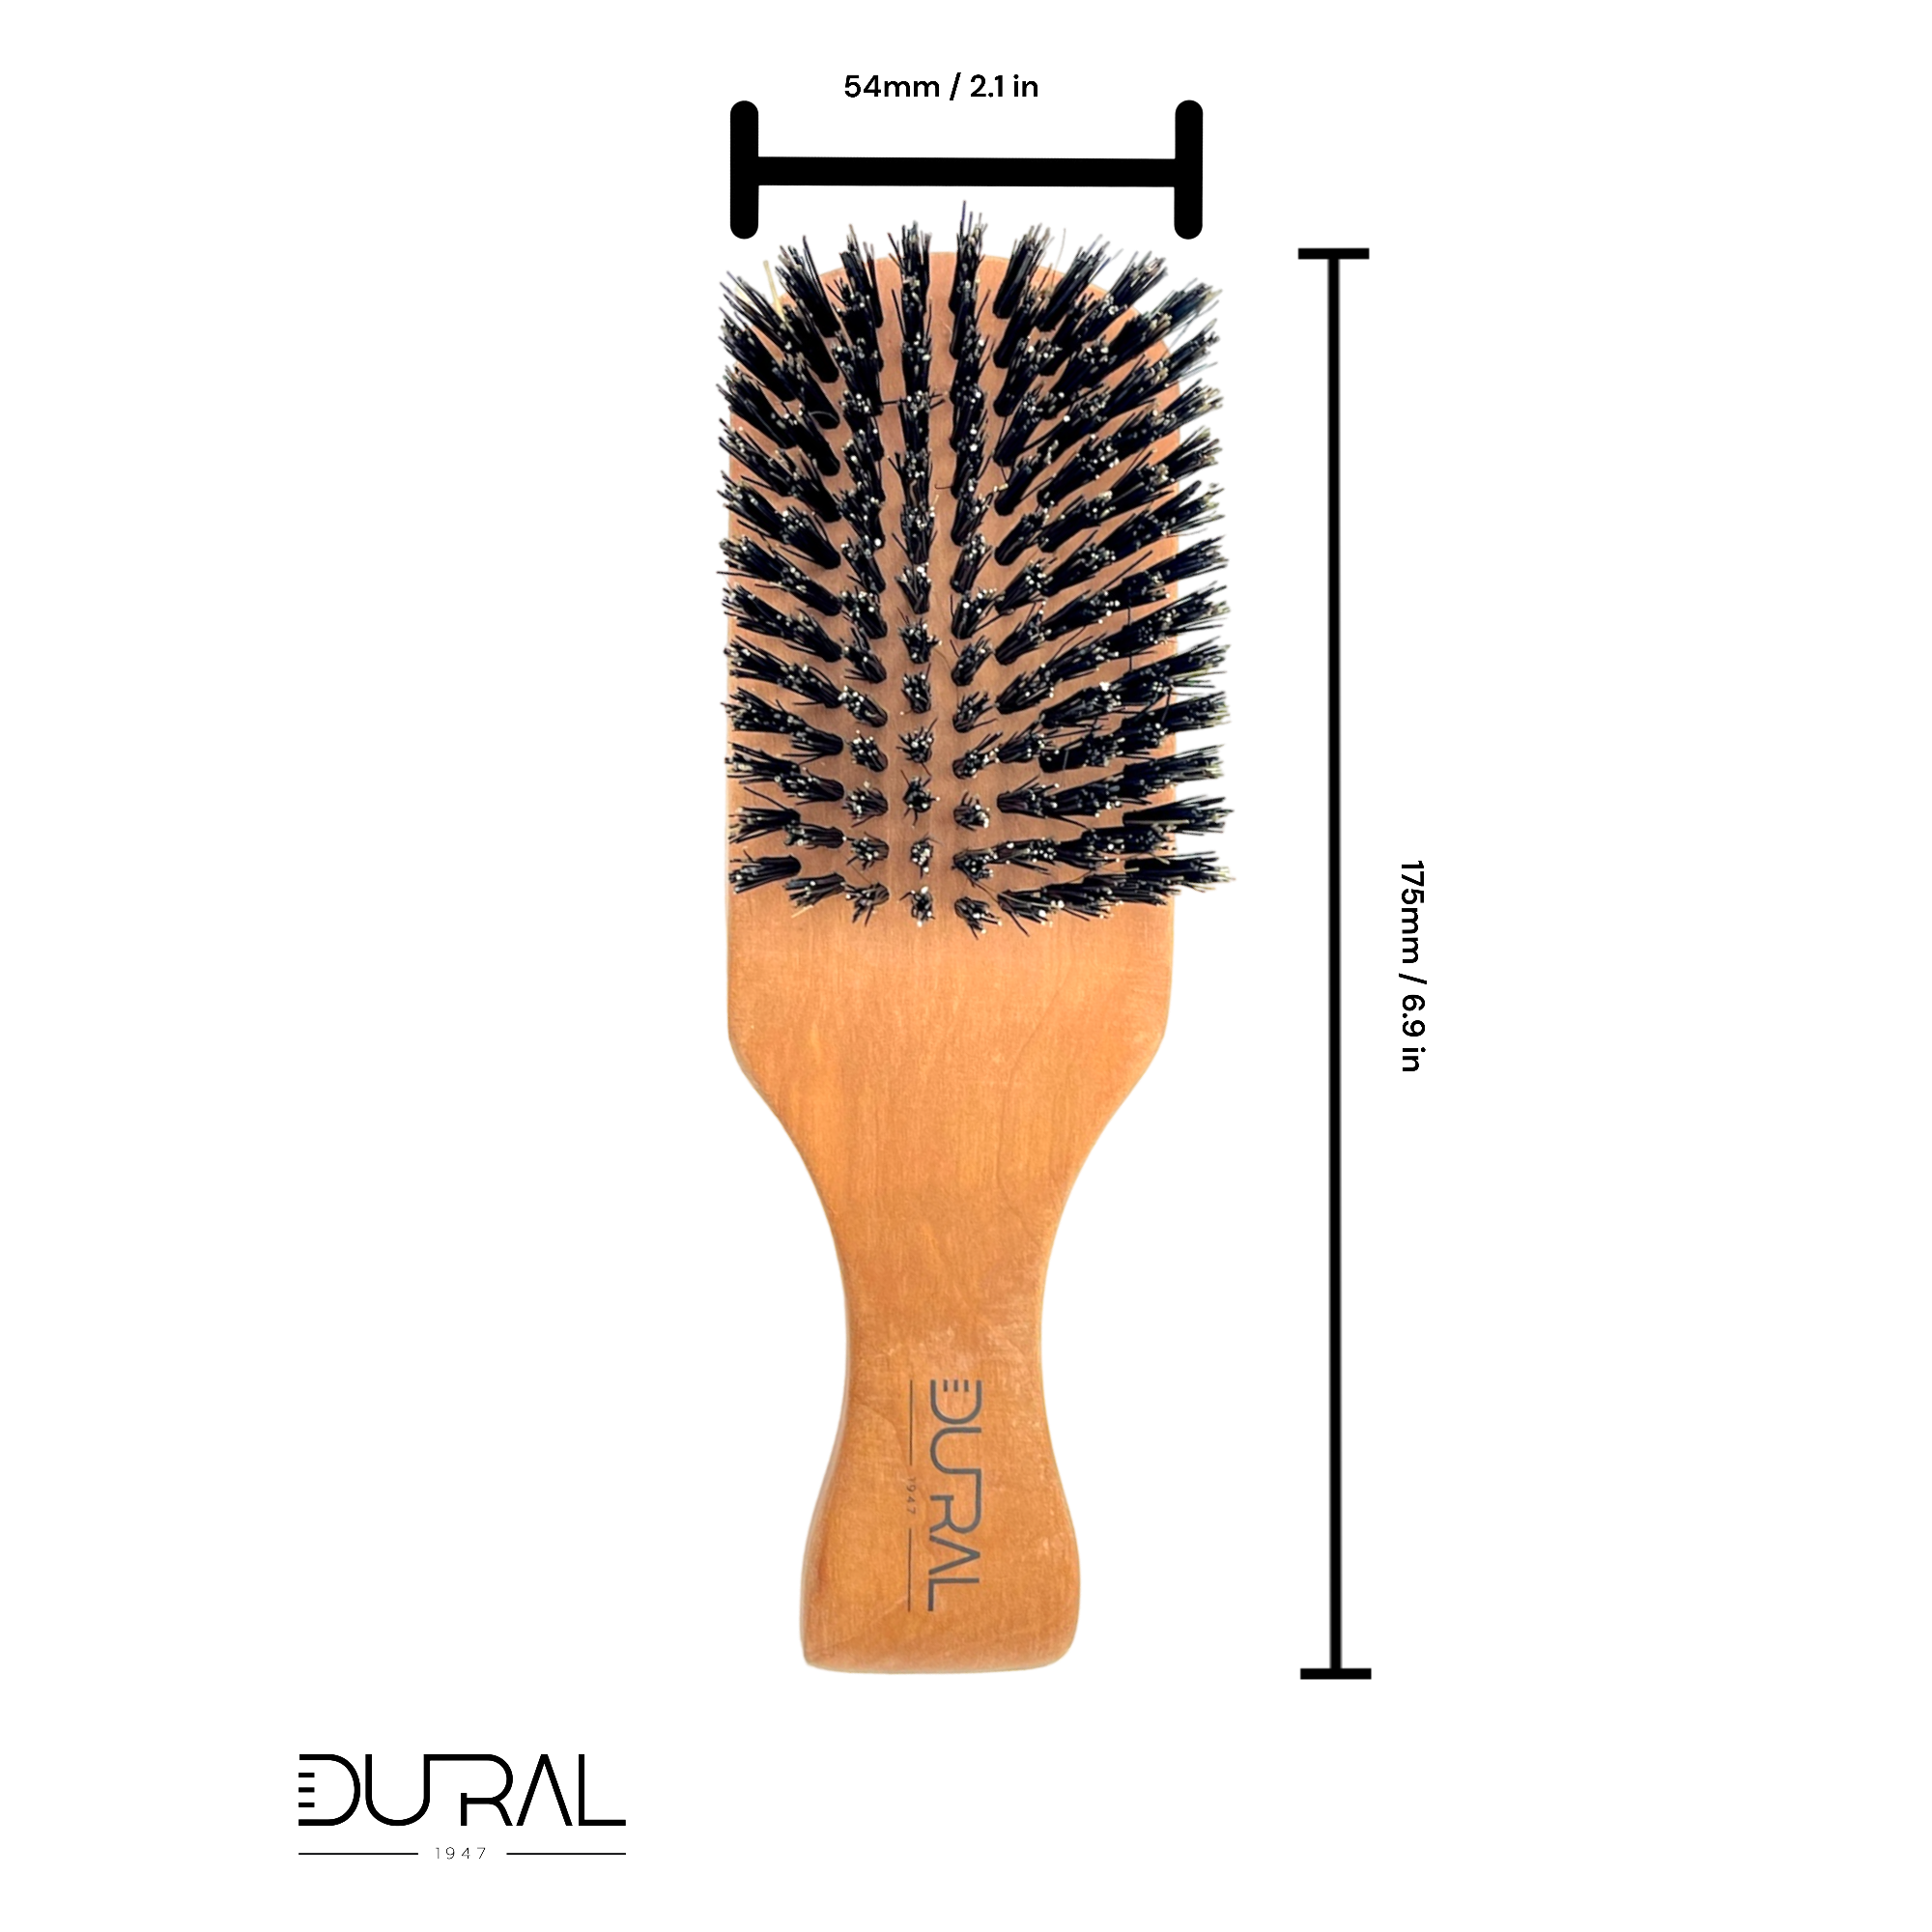 Dural Pear wood men's brush with wild boar bristles